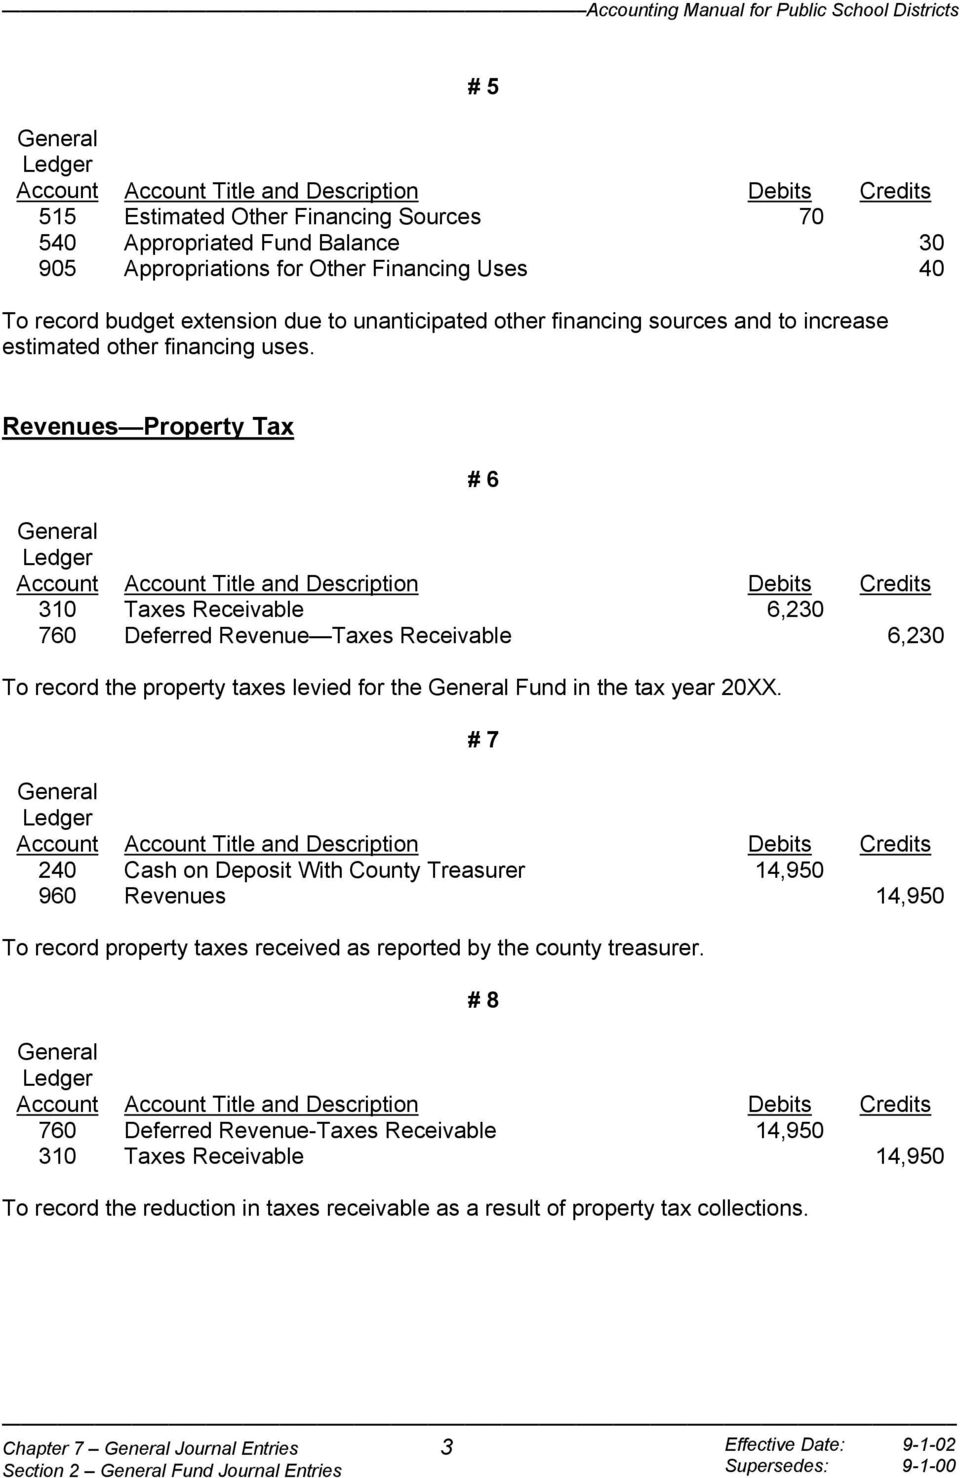 Revenues Property Tax # 6 310 Taxes Receivable 6,230 760 Deferred Revenue Taxes Receivable 6,230 To record the property taxes levied for the Fund in the tax year 20XX.